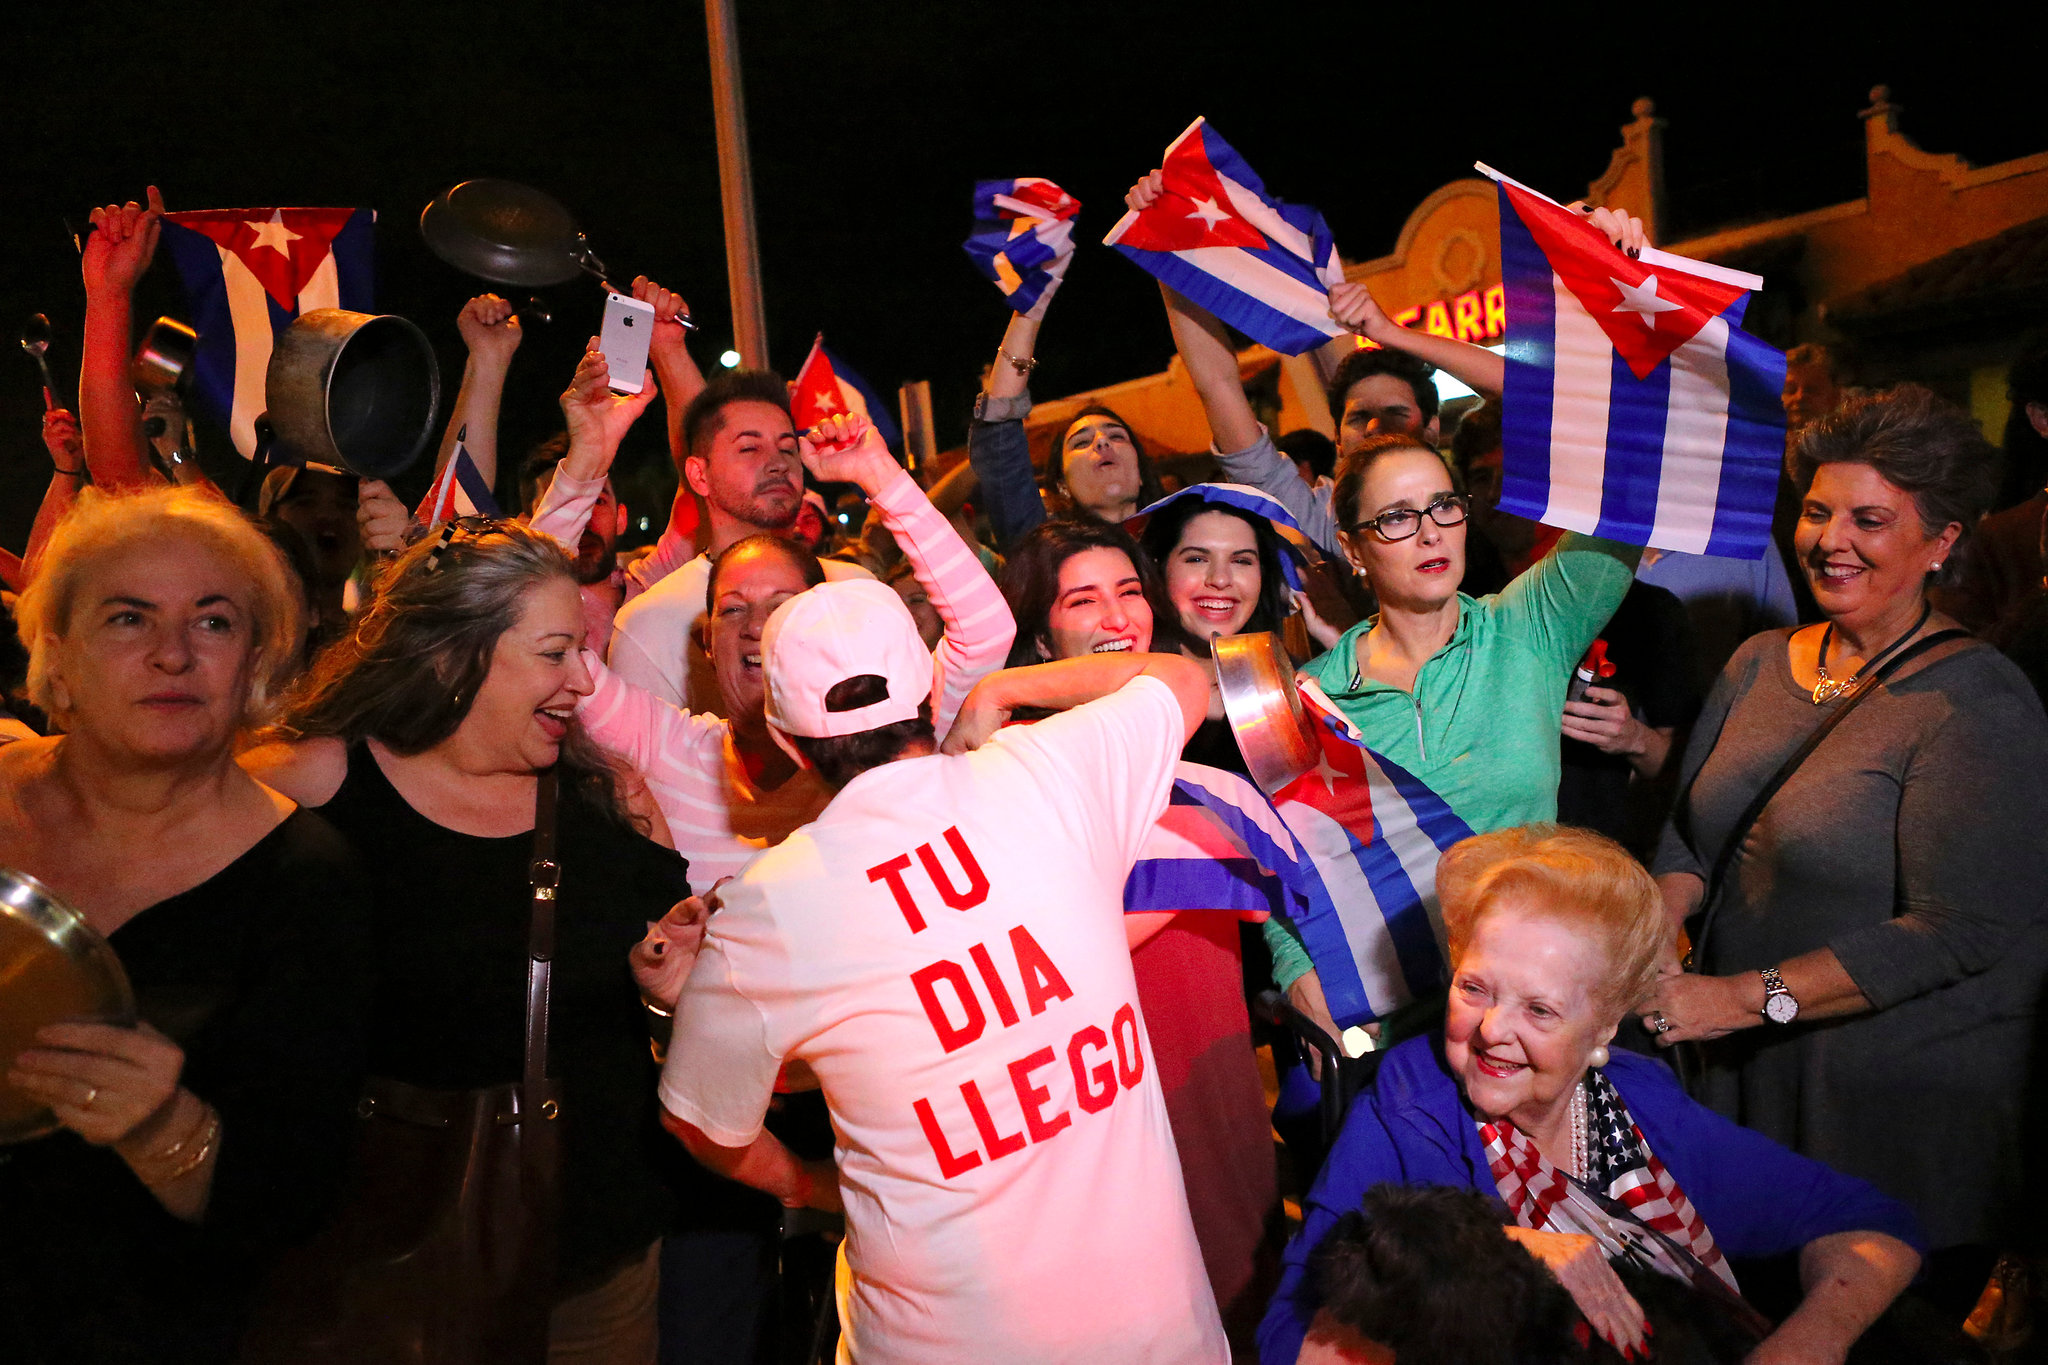 The Cuban community celebrated early Saturday in Miami, after the announcement that Fidel Castro had died.; links to news story